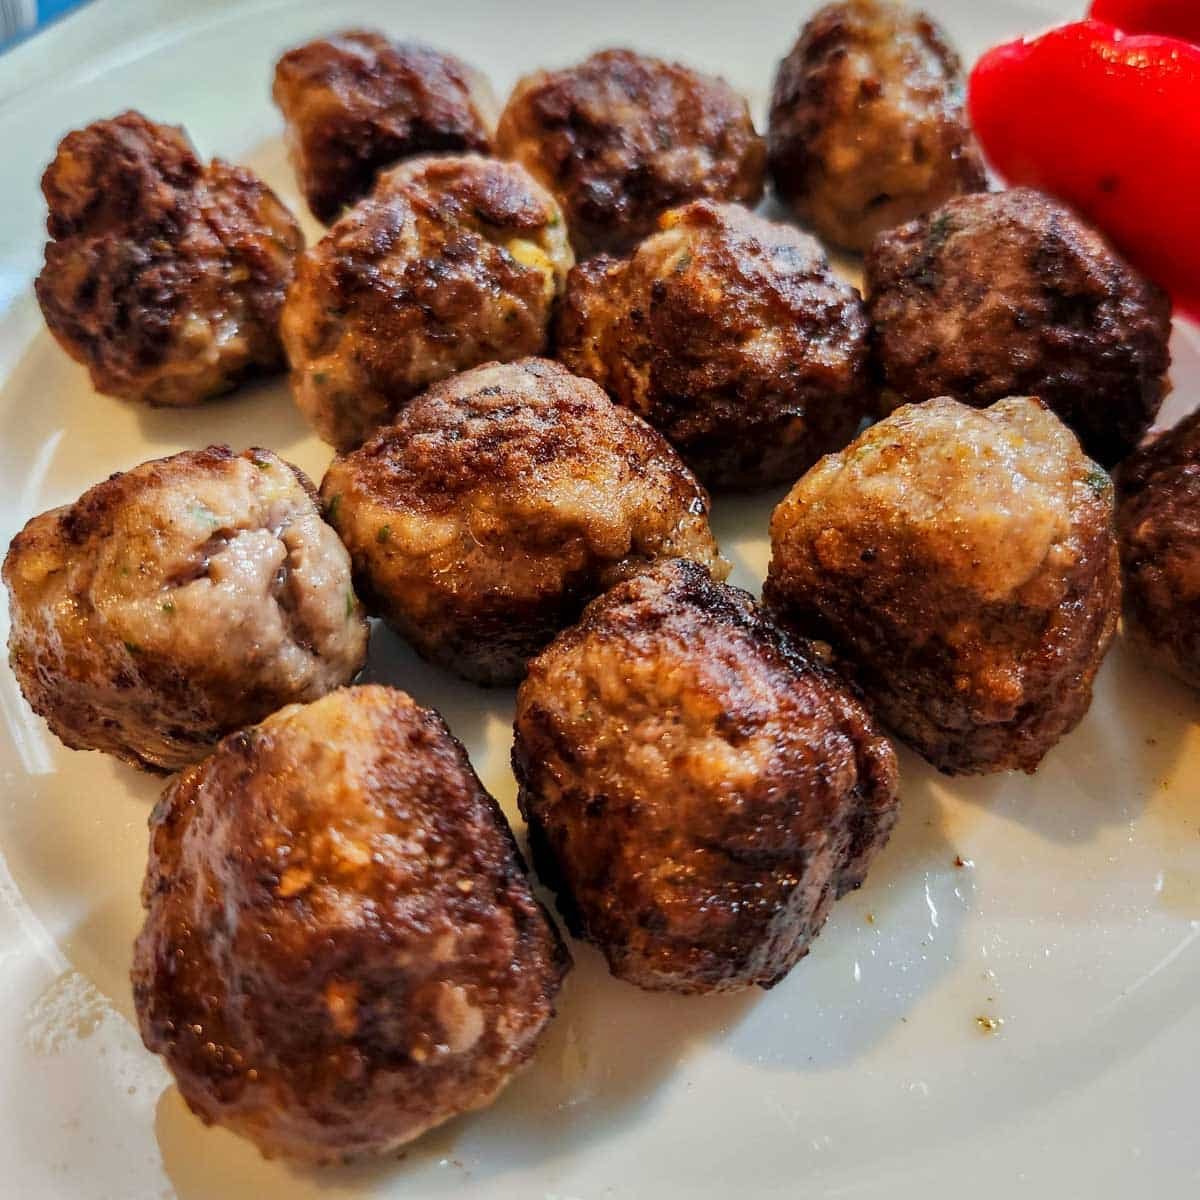 browned meatballs with a nice golden brown exterior